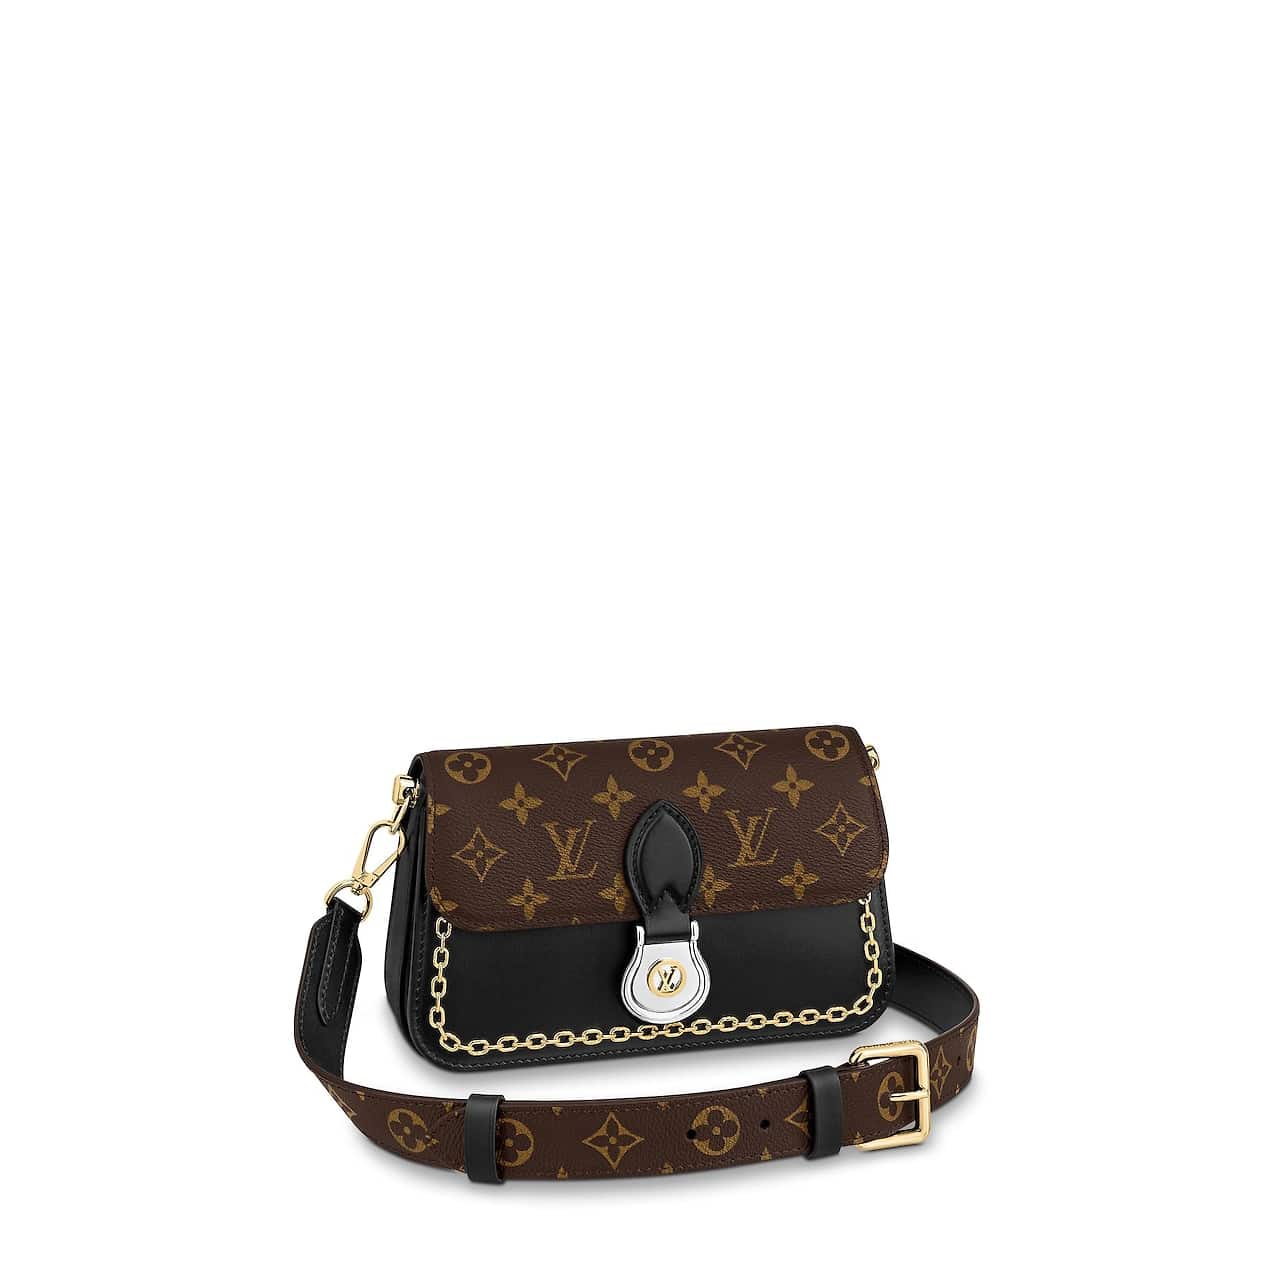 Louis Vuitton New Releases & Collector Must-Have 2019/2020 – Bagaholic